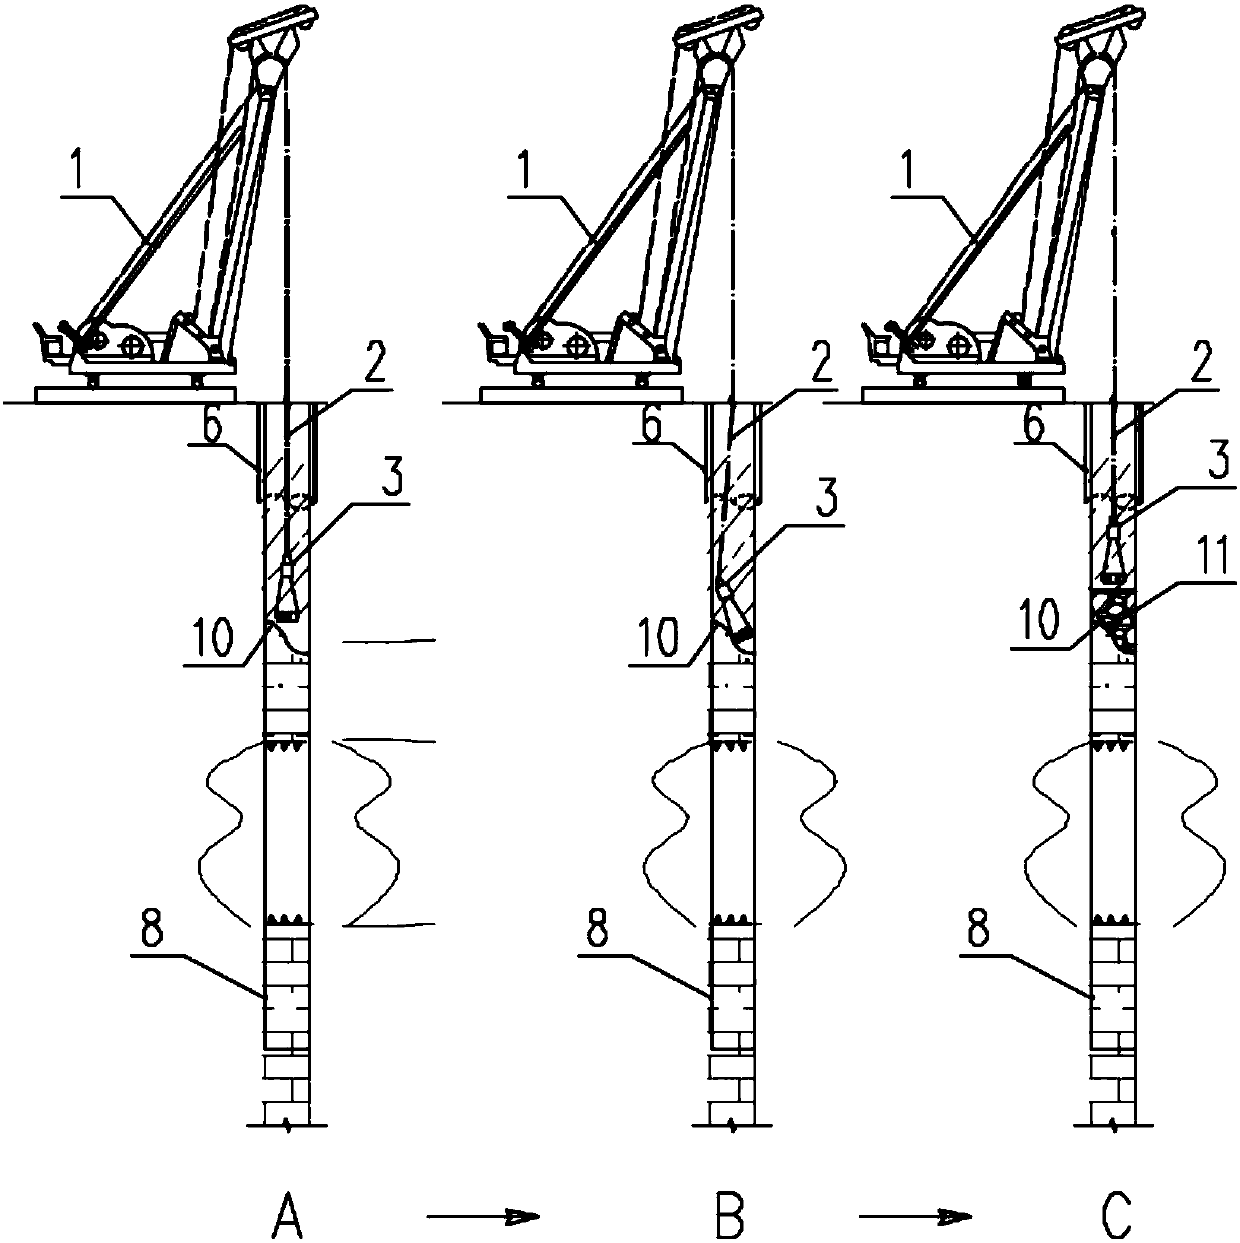 Complex karst site anti-collapse impact holing construction method